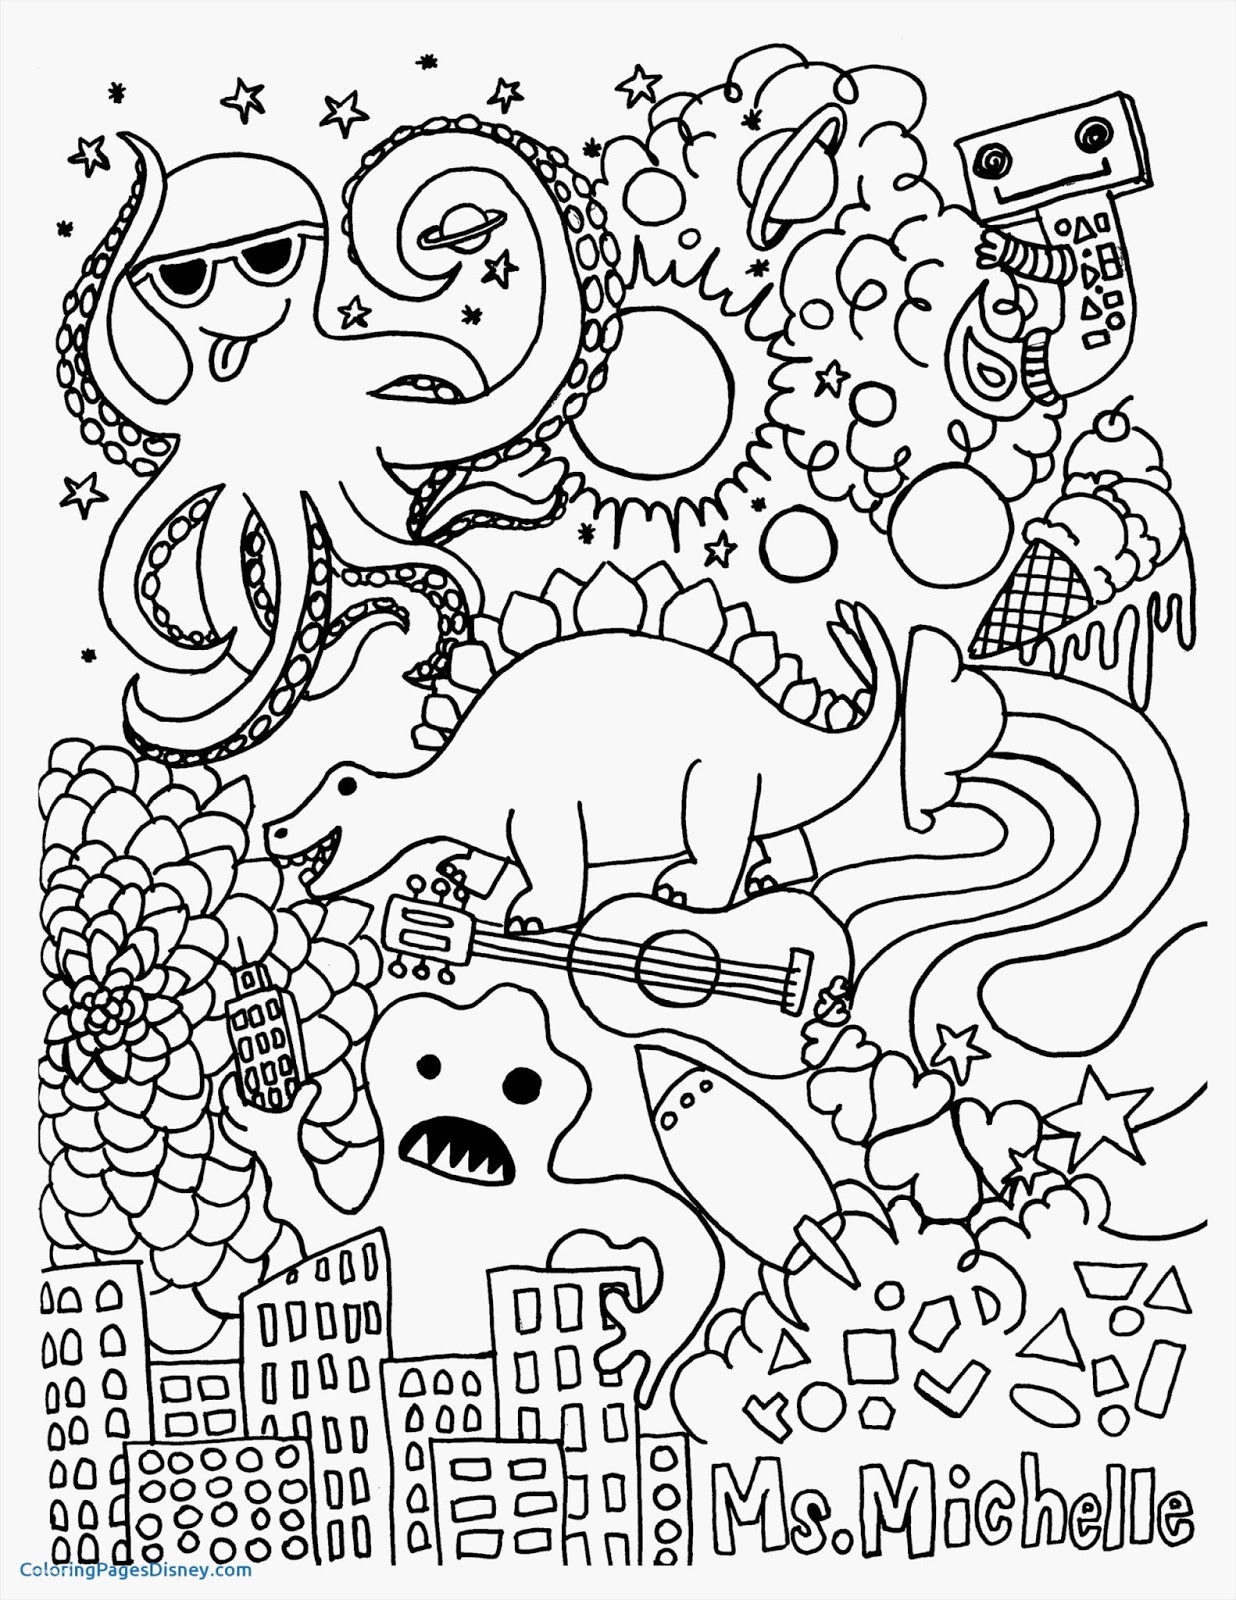 coloring-pages-free-printable-fun-coloring